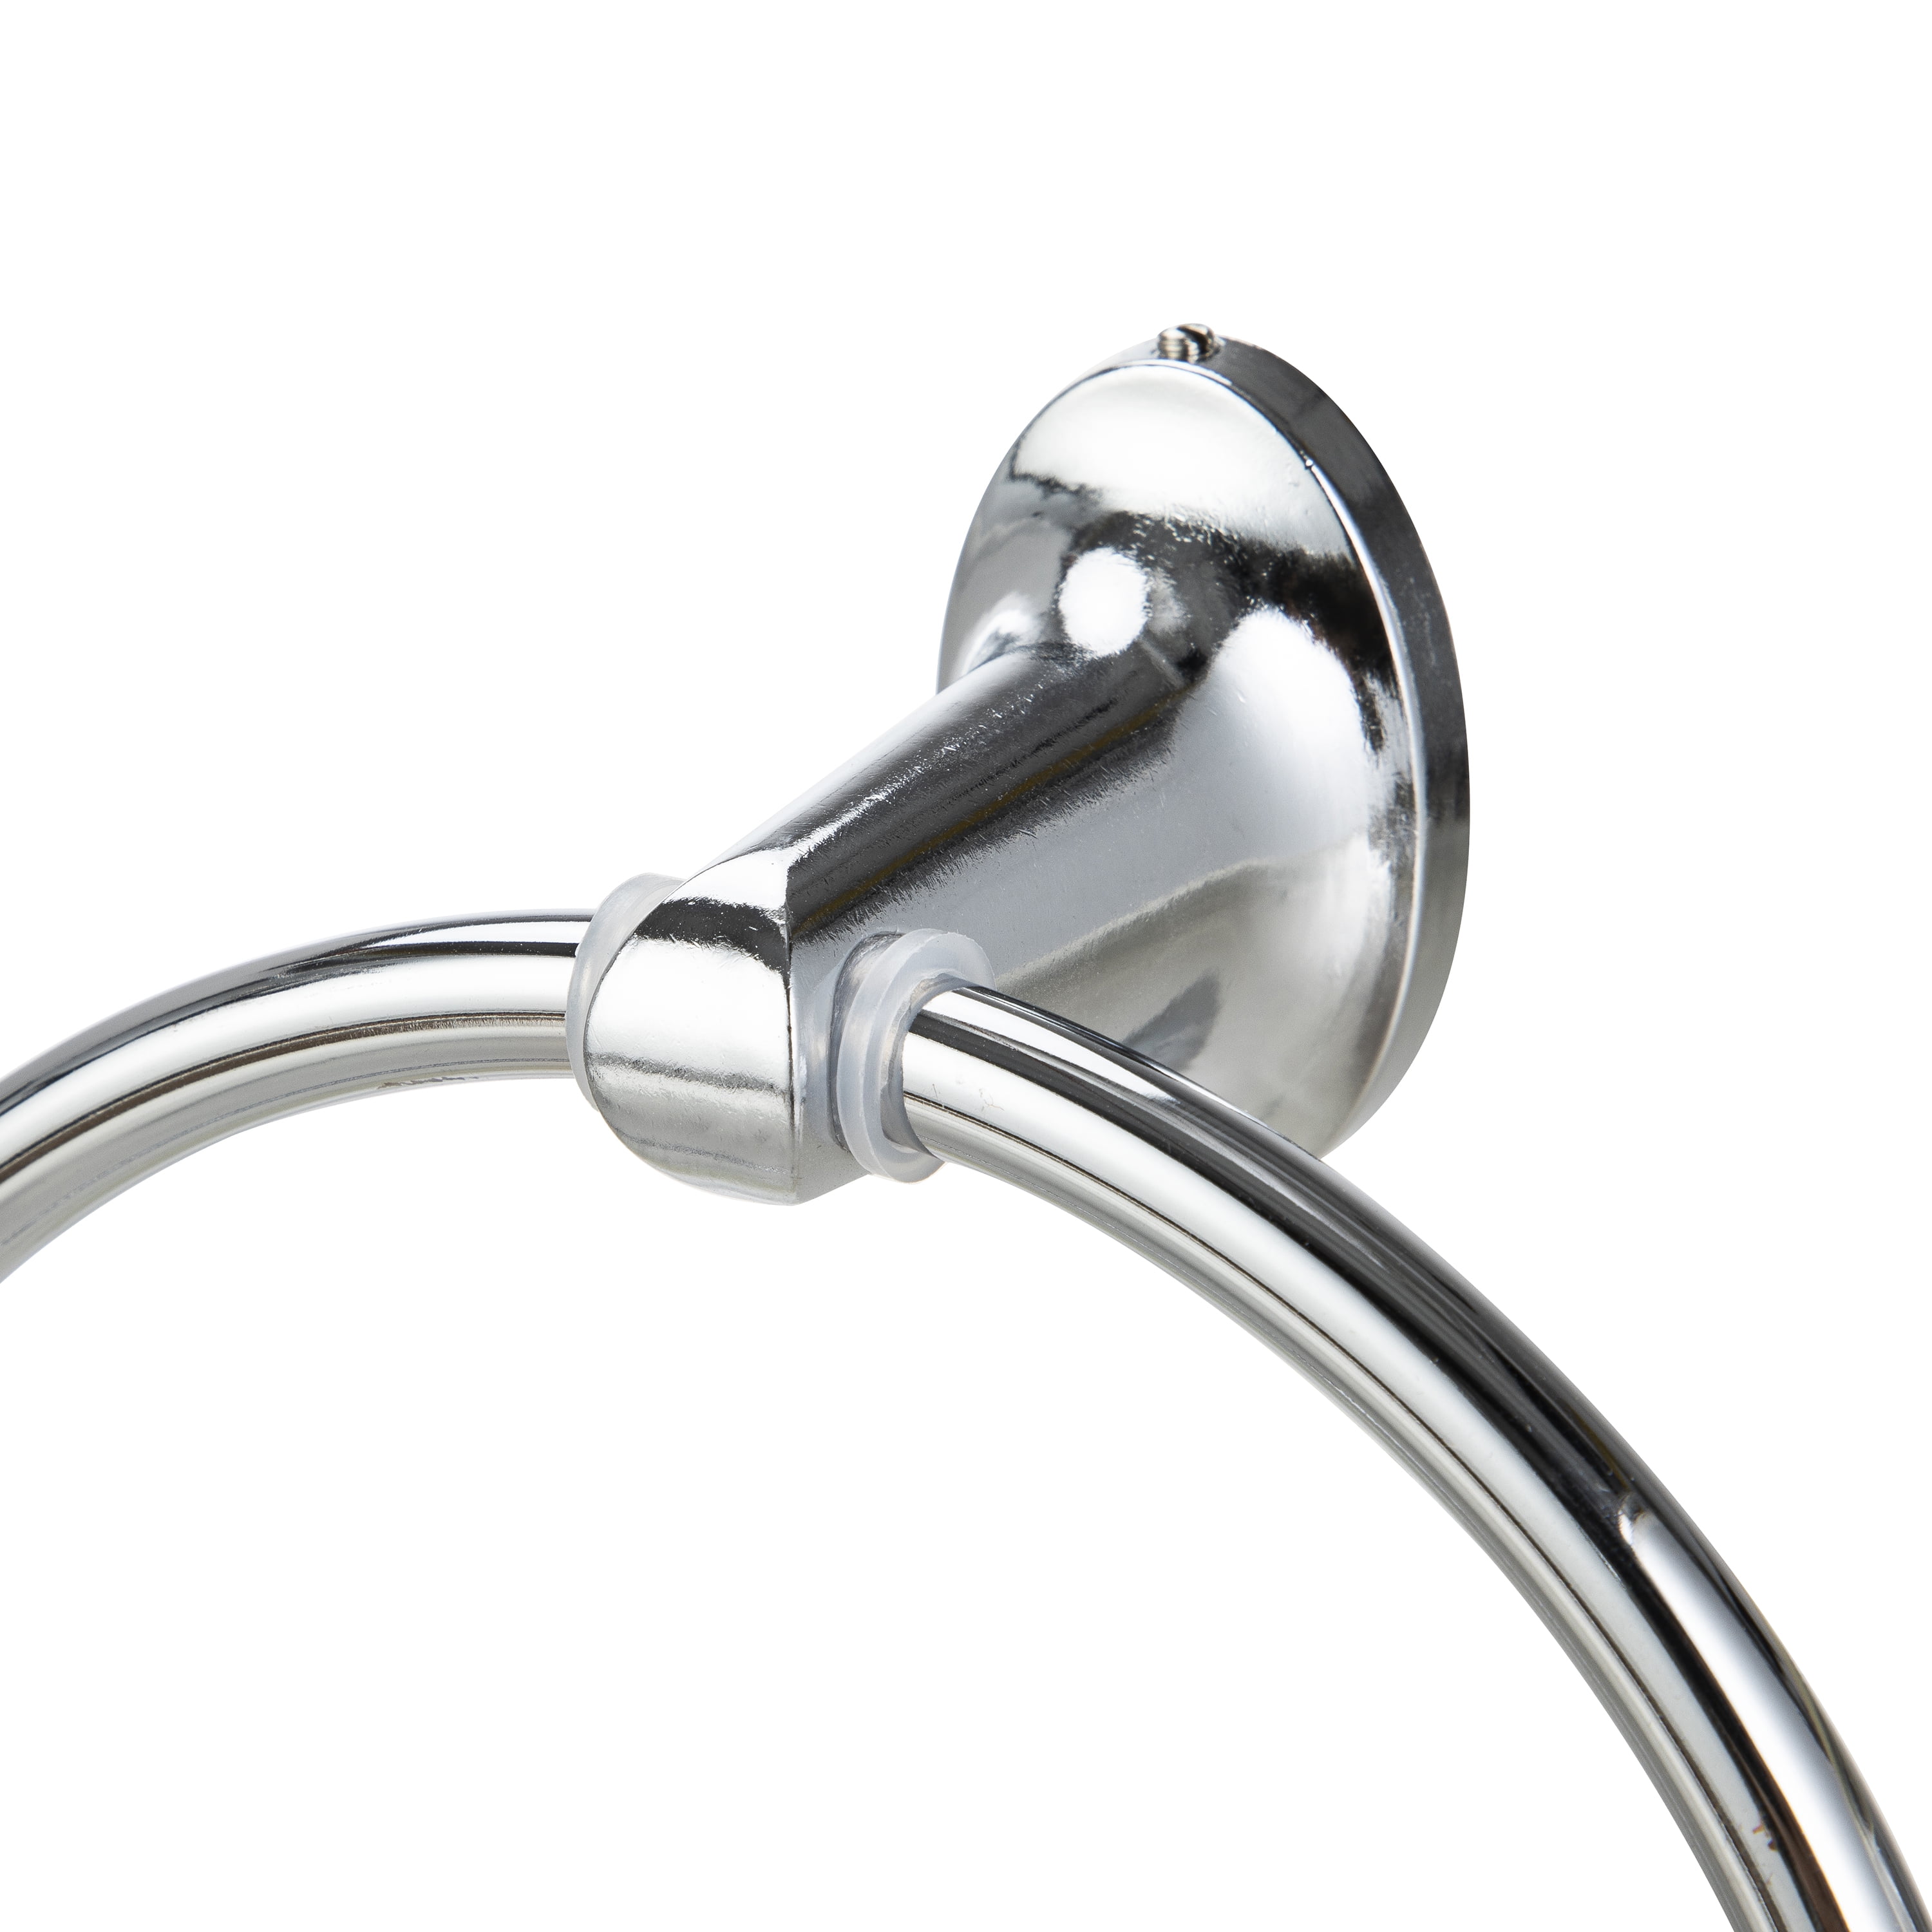 Mainstays Oval Style Steel Towel Holder Ring, Chrome Finish 